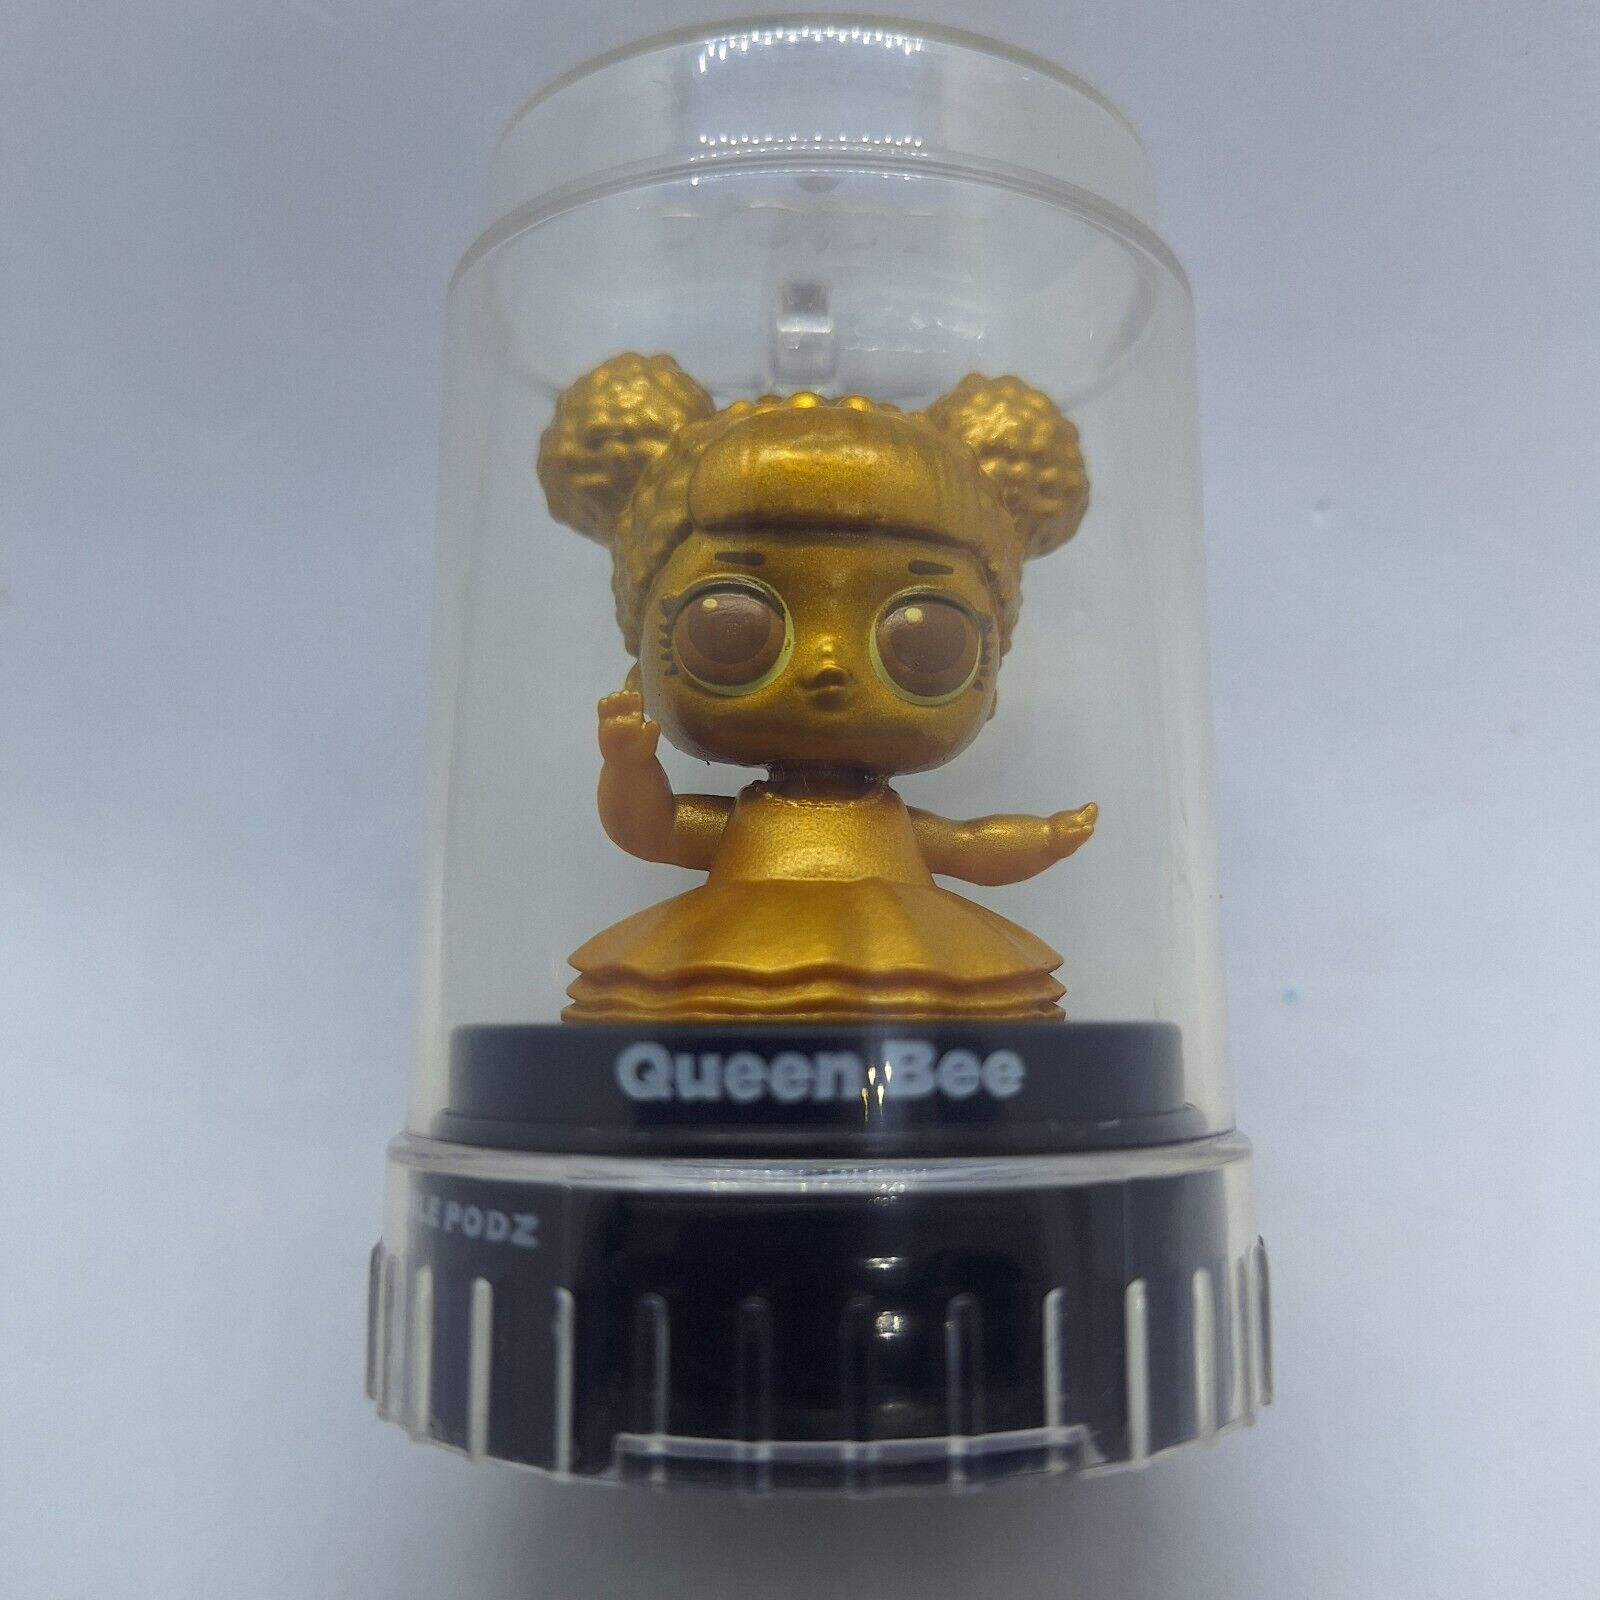 Good 2 Grow Mystery Podz “LOL” Surprise Queen Bee Mystery Variant Toppers Gold